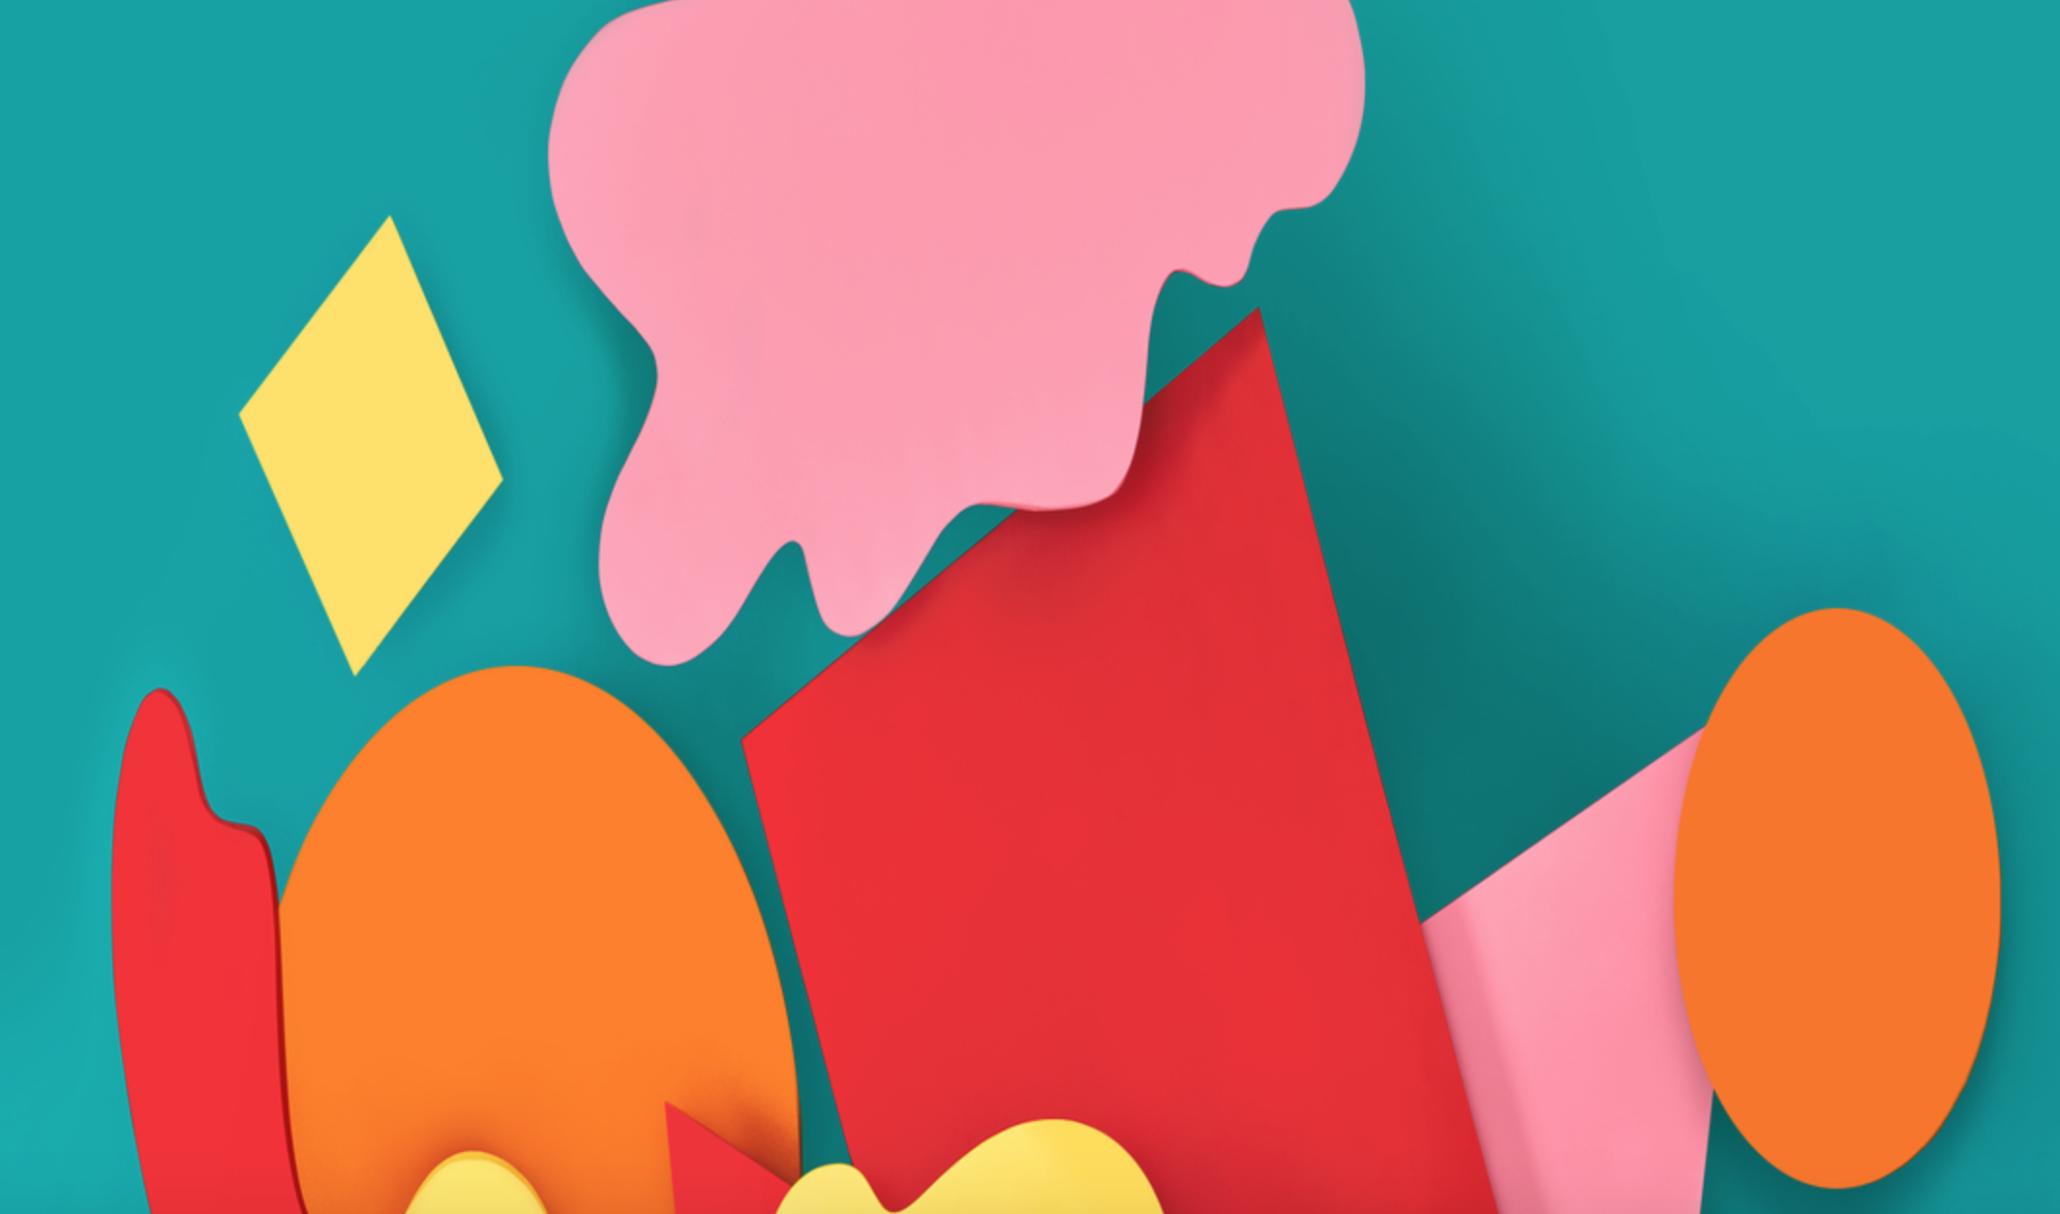 wallpapers for android,construction paper,illustration,design,graphics,art